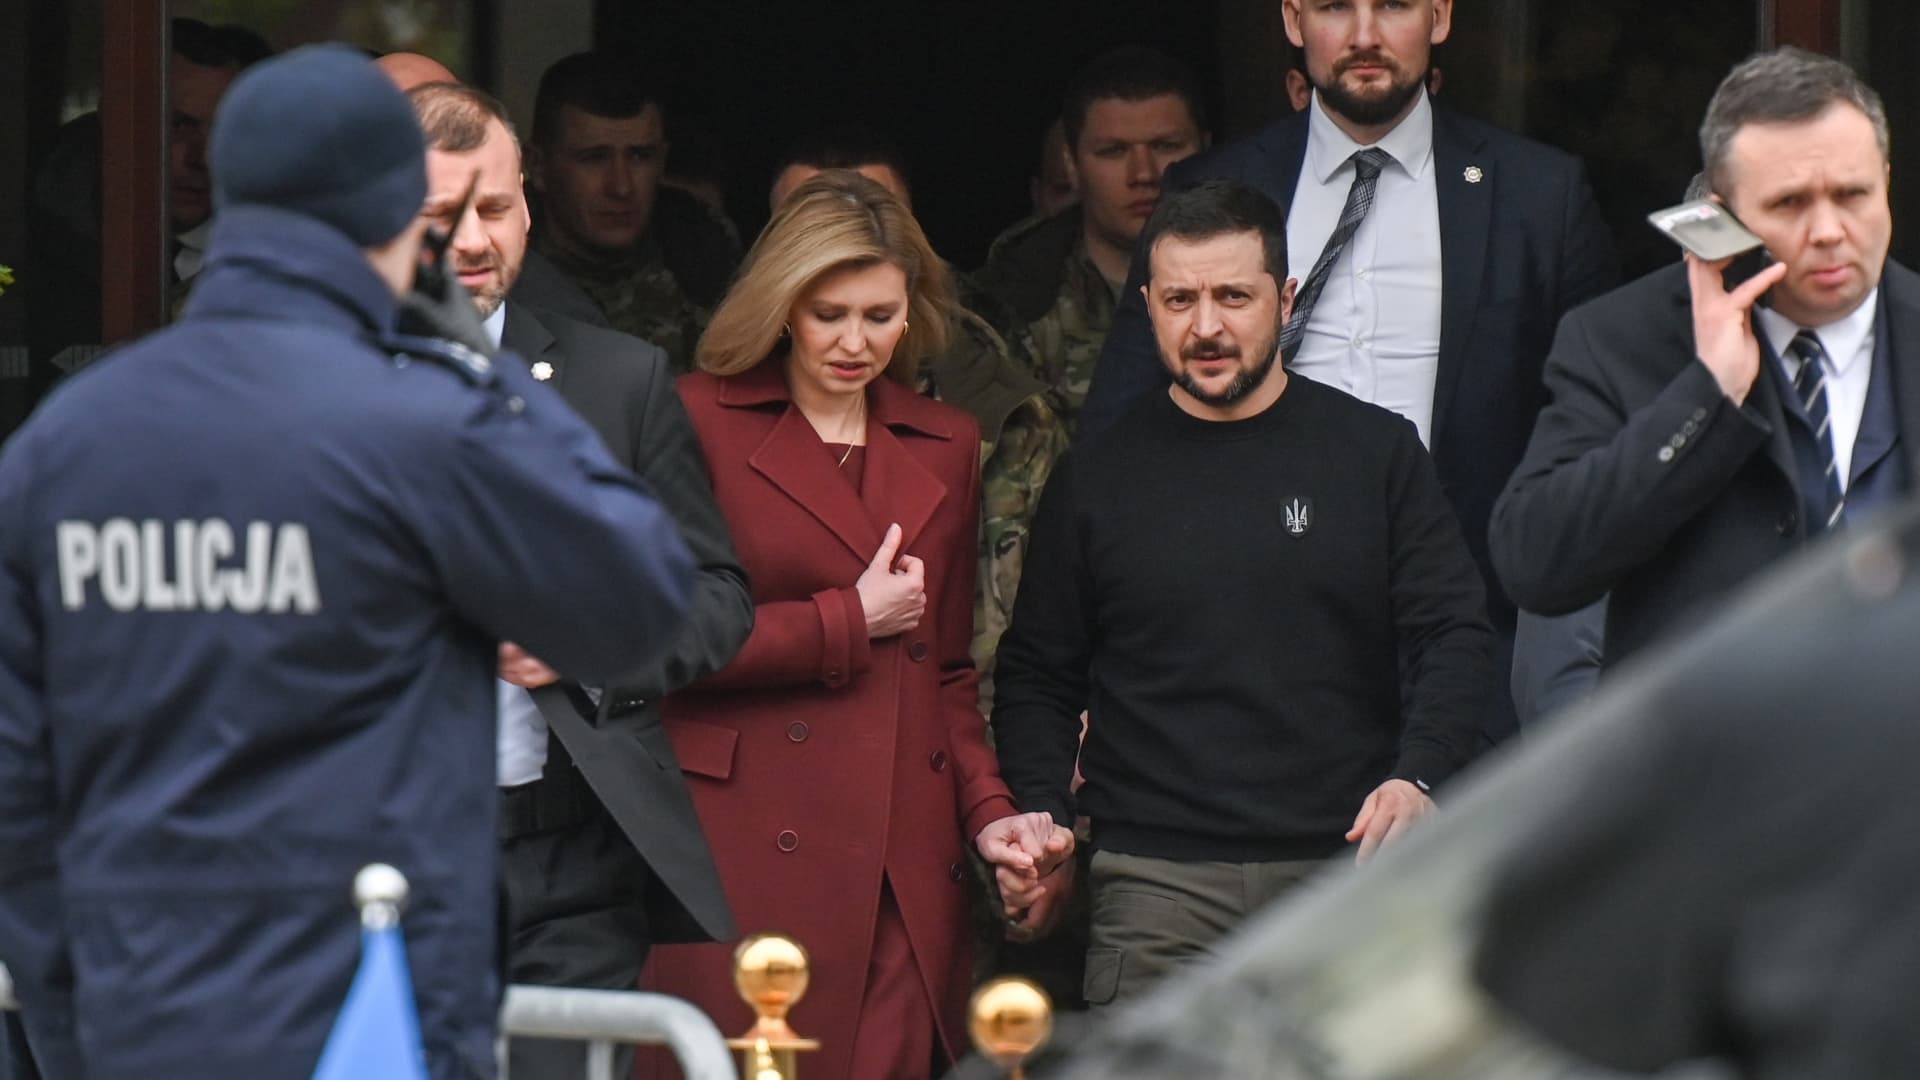 Ukraine's President Volodymyr Zelenskyy and First Lady Olena Zelenska leave Hotel Bristol ahead of the official welcoming ceremony by Polish President Andrzej Duda and First Lady Agata Kornhauser-Duda, at the Presidential Palace, during their one day visit to Poland, on April 05, 2023, in Warsaw, Poland.